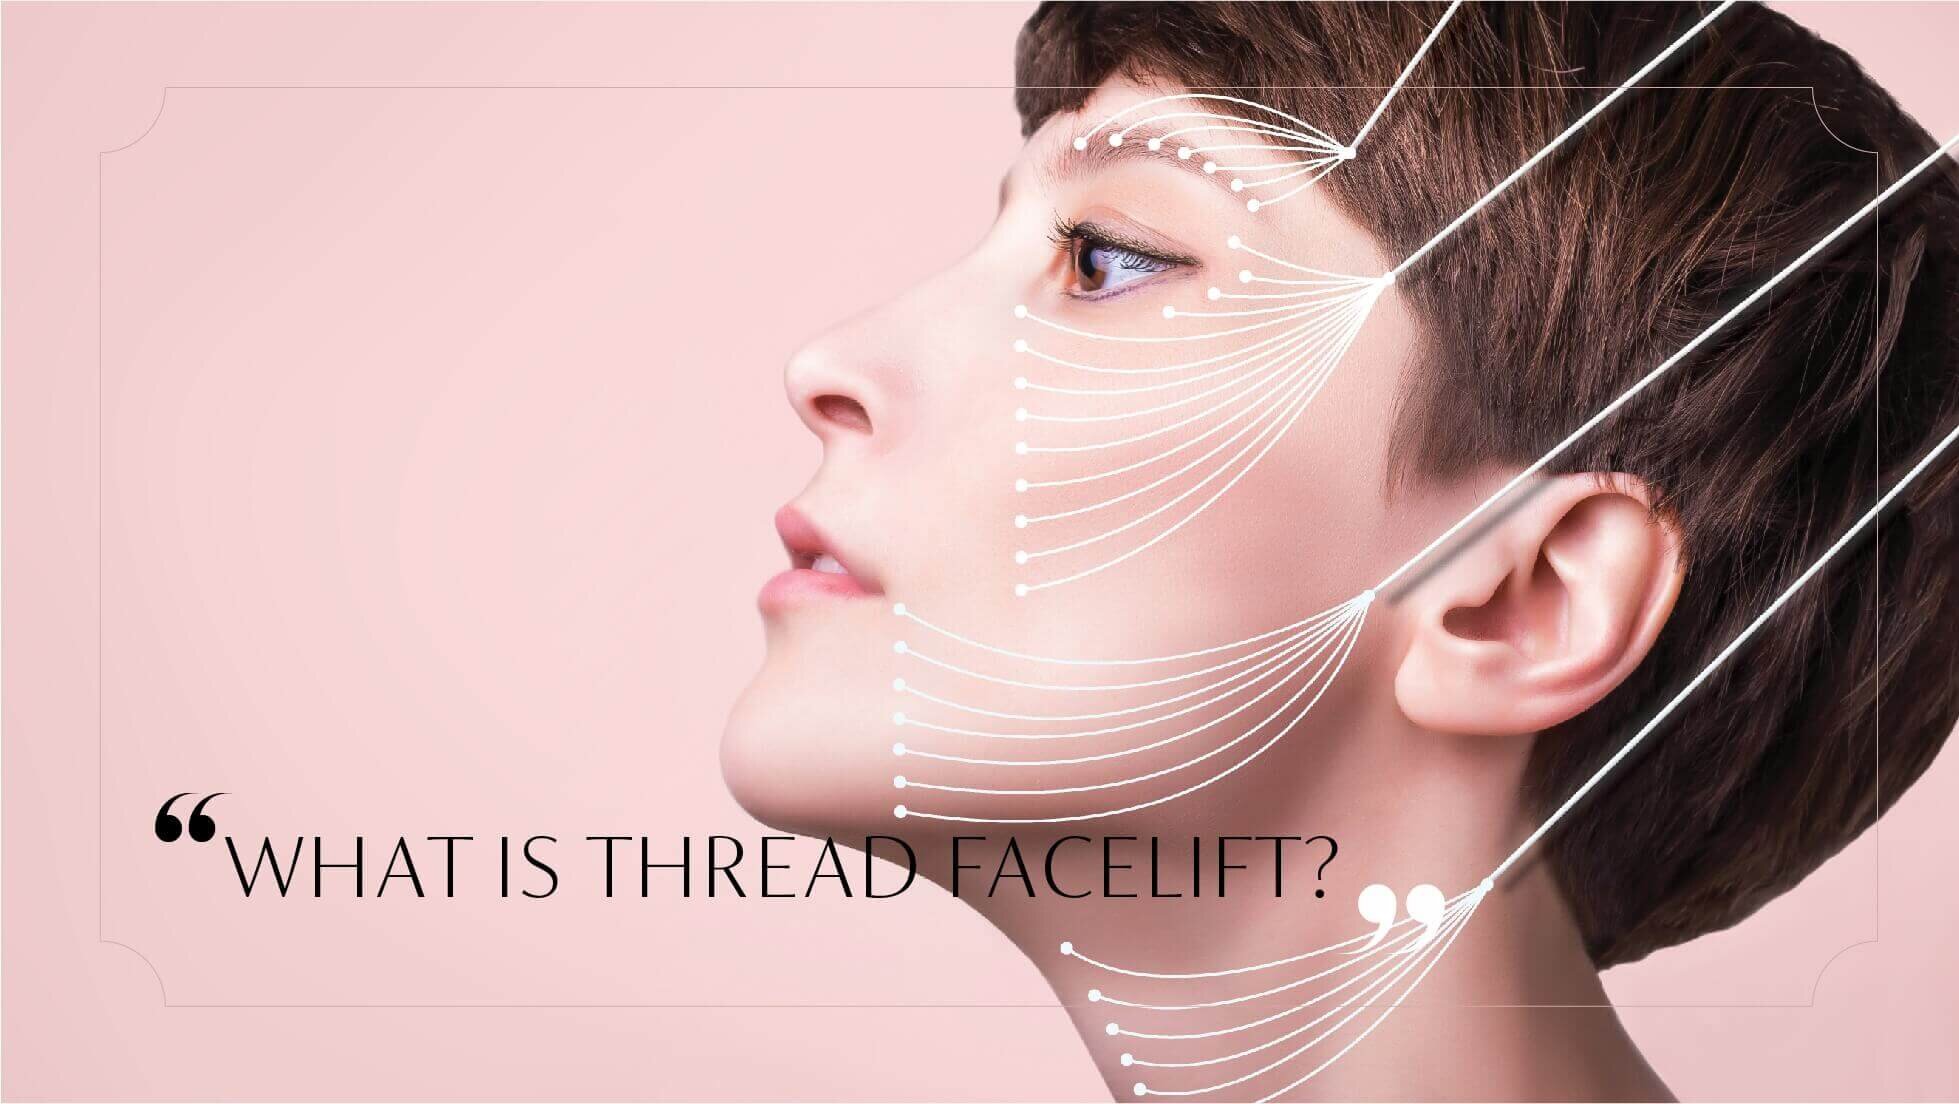 What is a Thread Facelift?